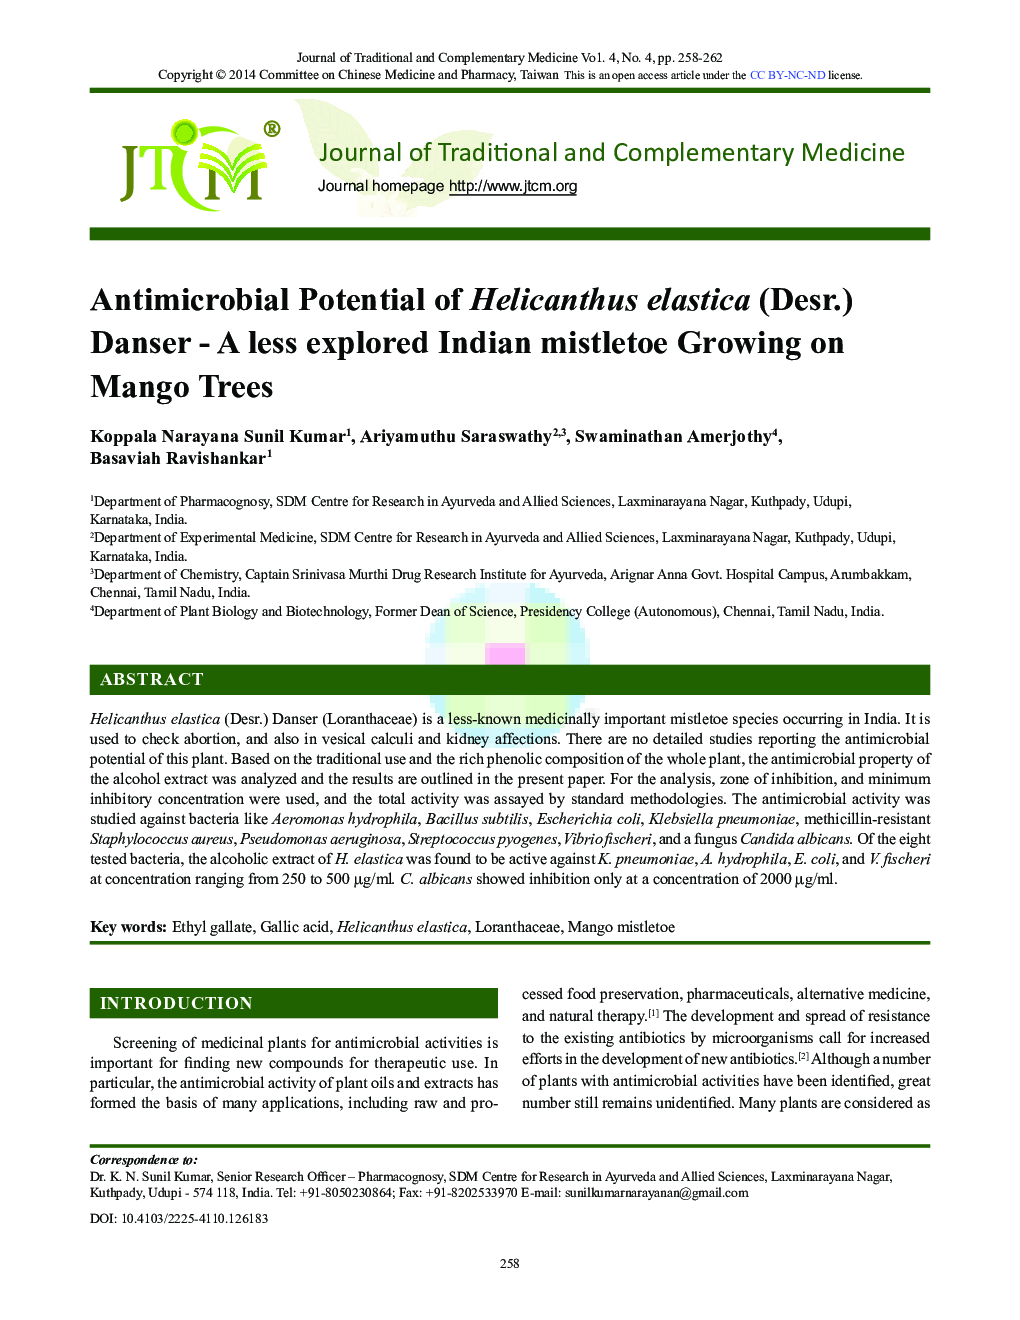 Antimicrobial Potential of Helicanthus elastica (Desr.) Danser - A less explored Indian mistletoe Growing on Mango Trees